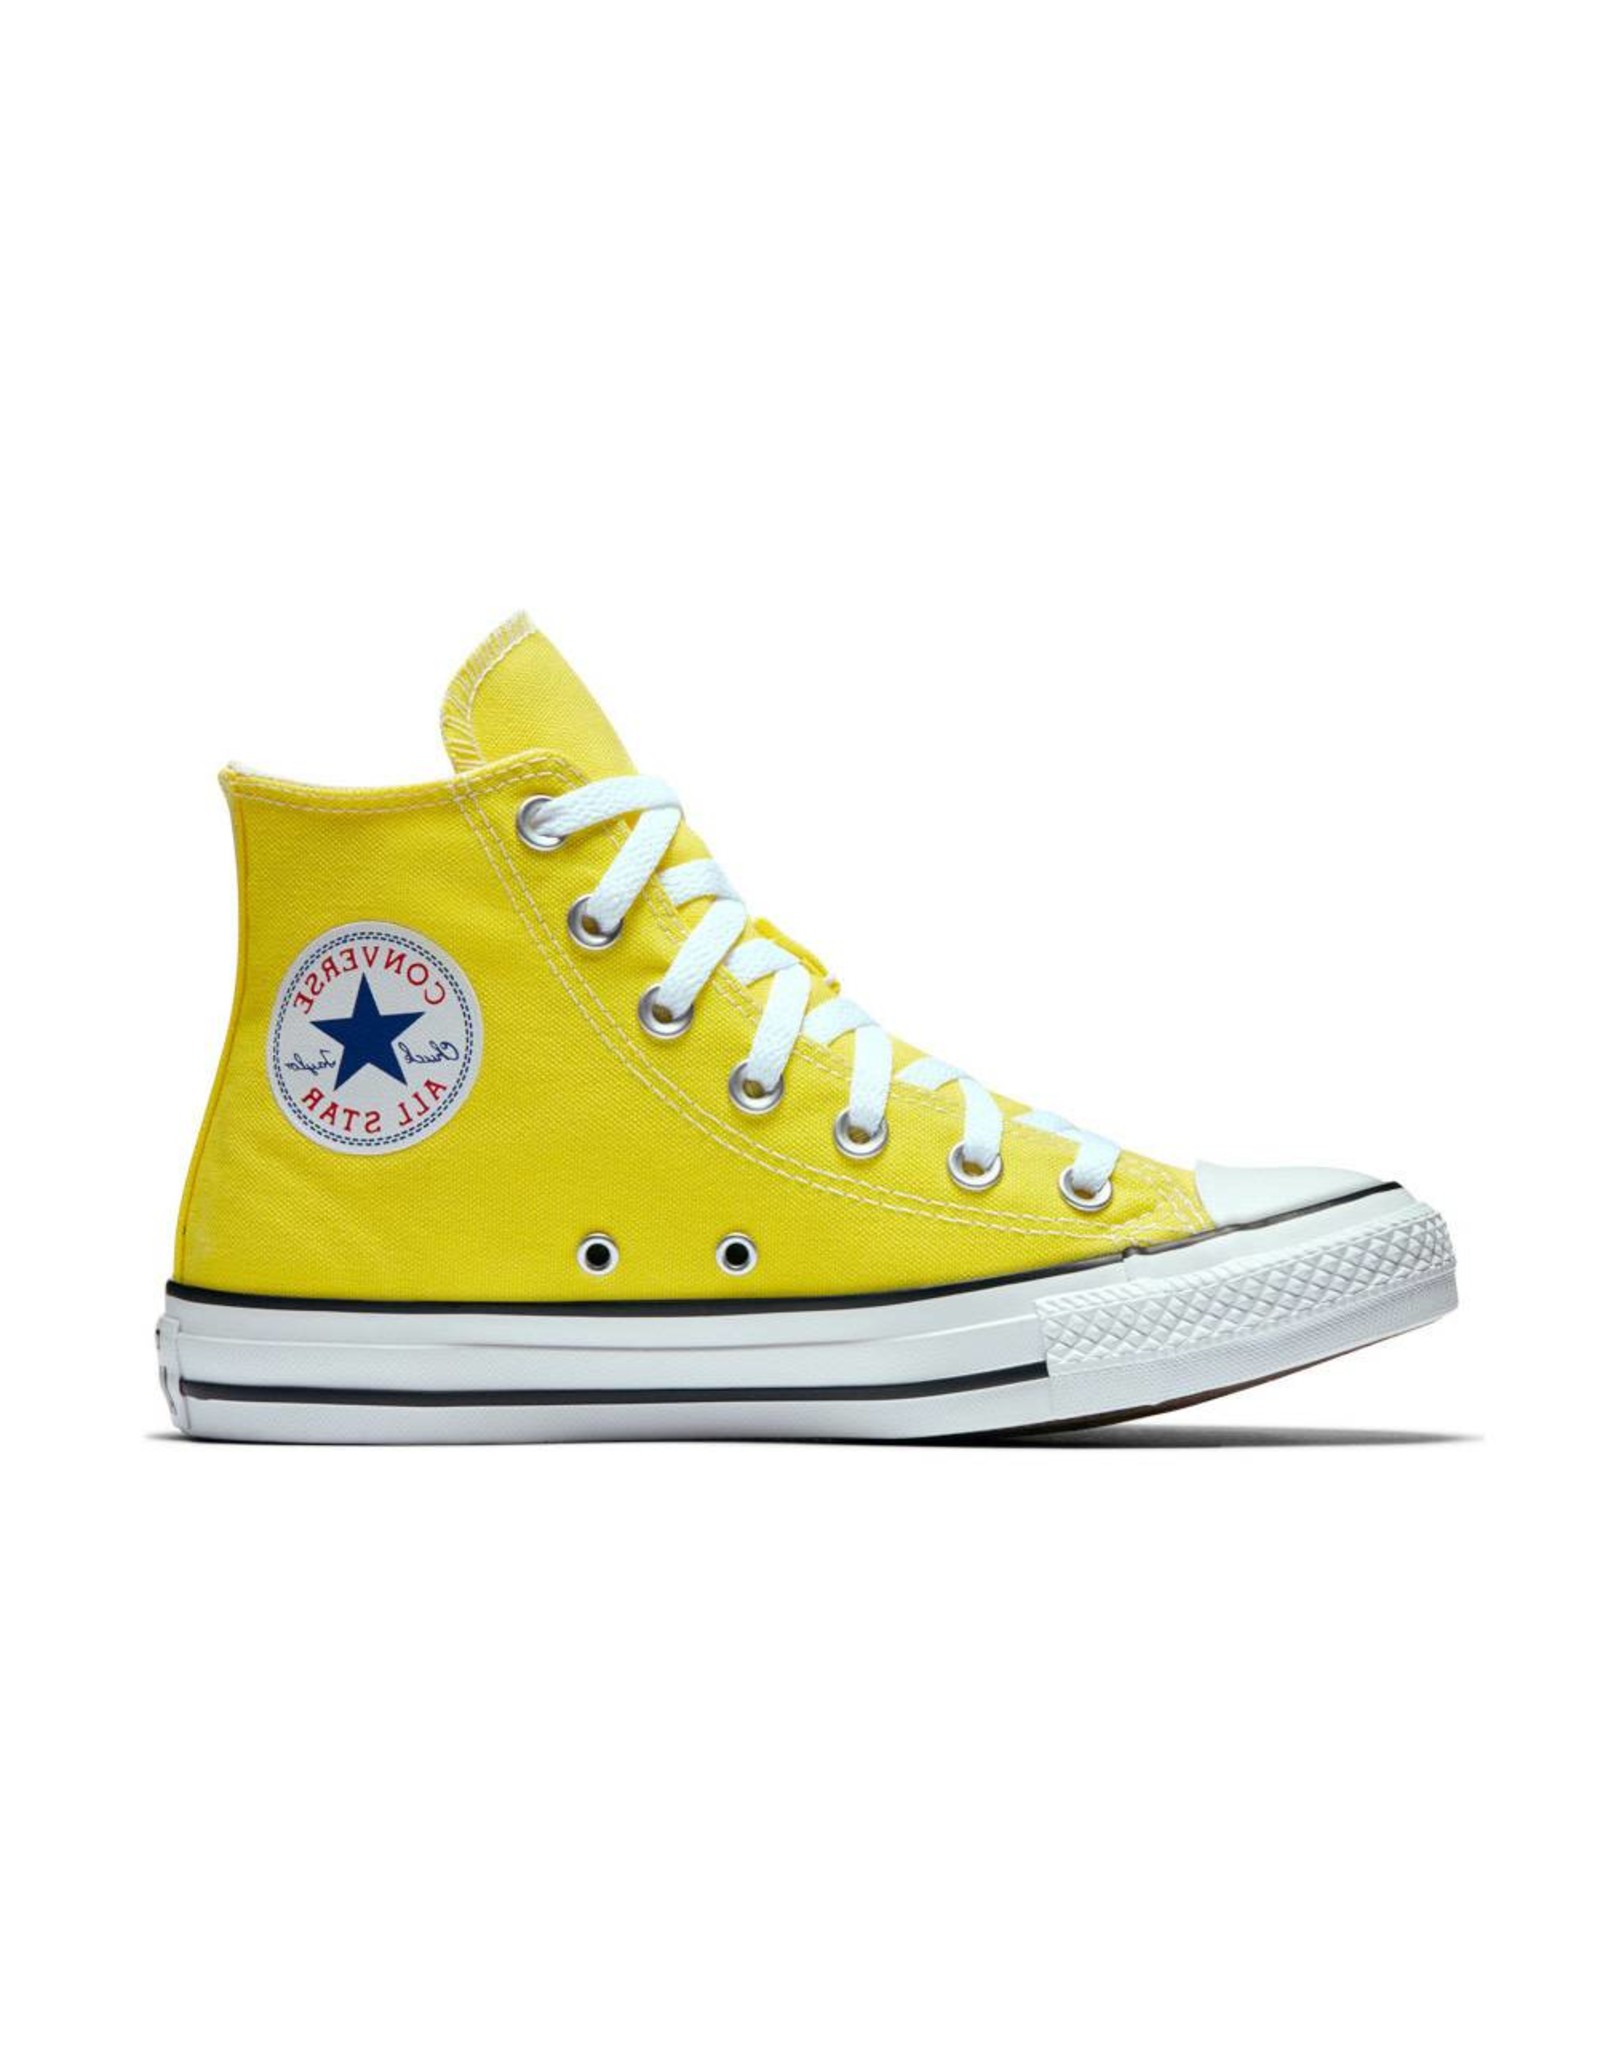 converse gone yellow